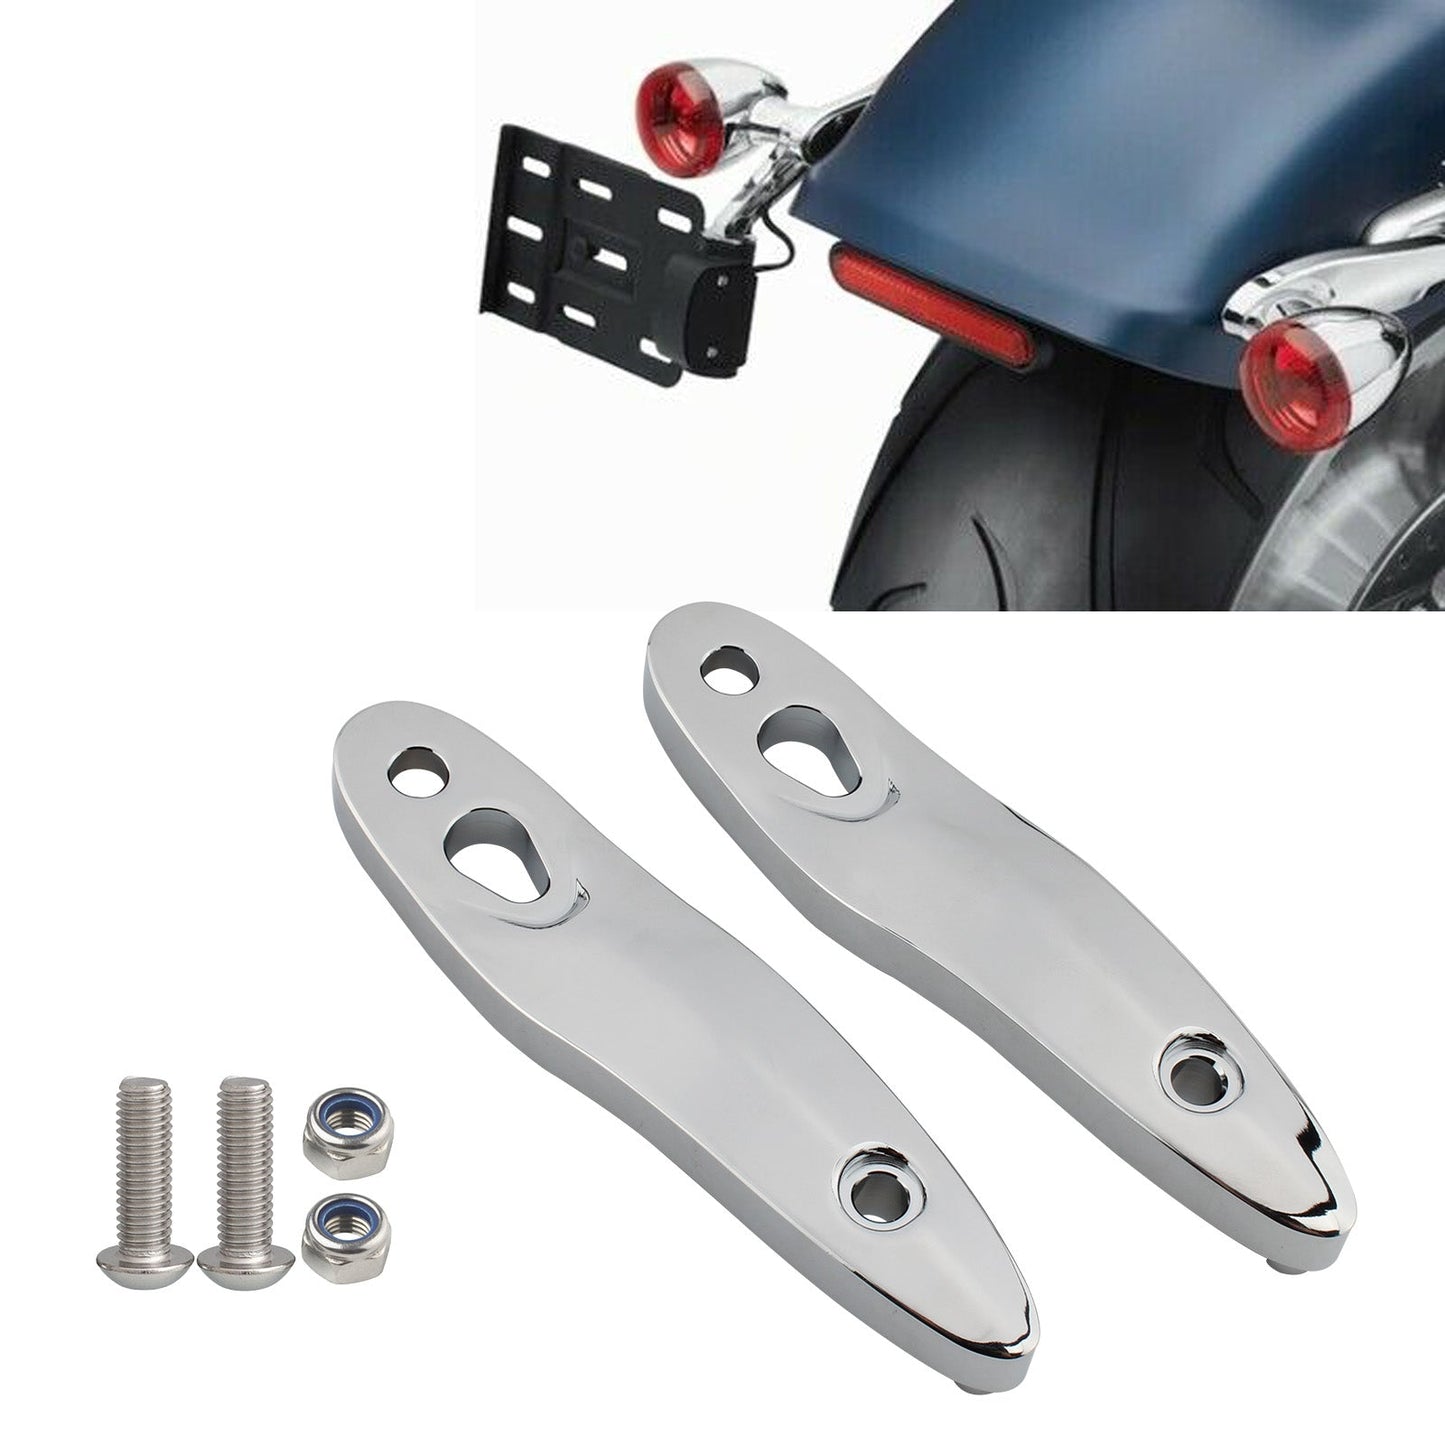 Turn Signal Extension Bracket License Plate Relocation Kit Fit for Softail 00-20 Black